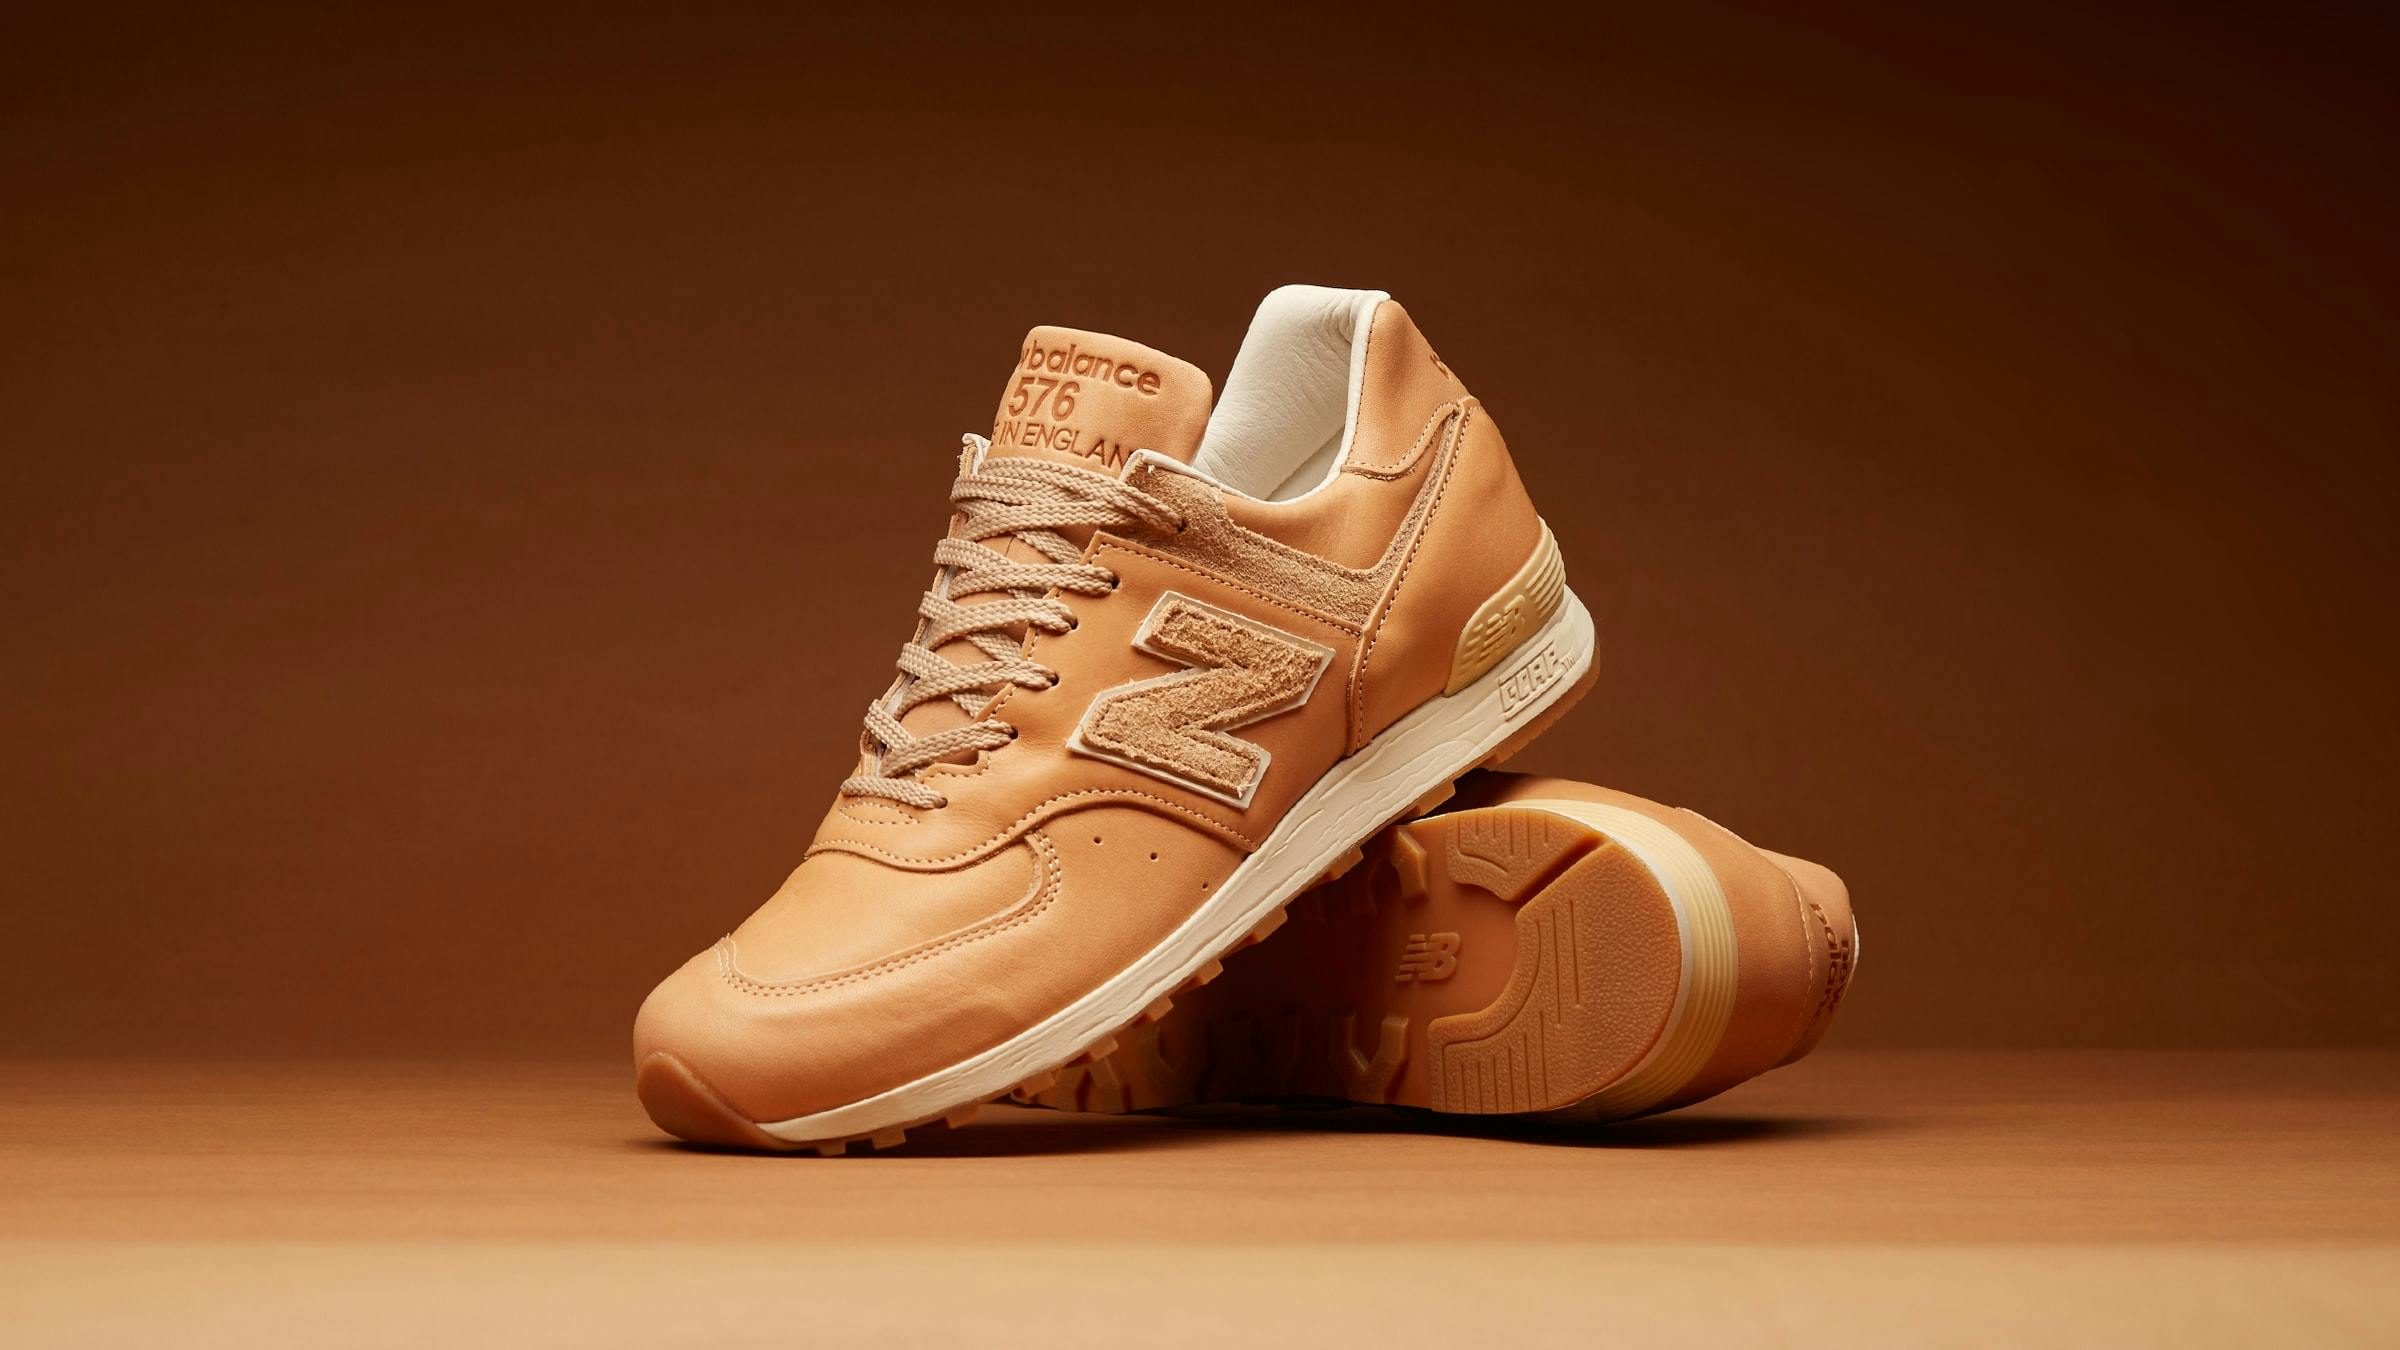 New Balance Leather Co. 576 - Register Now On (JP) Launches END. (JP)